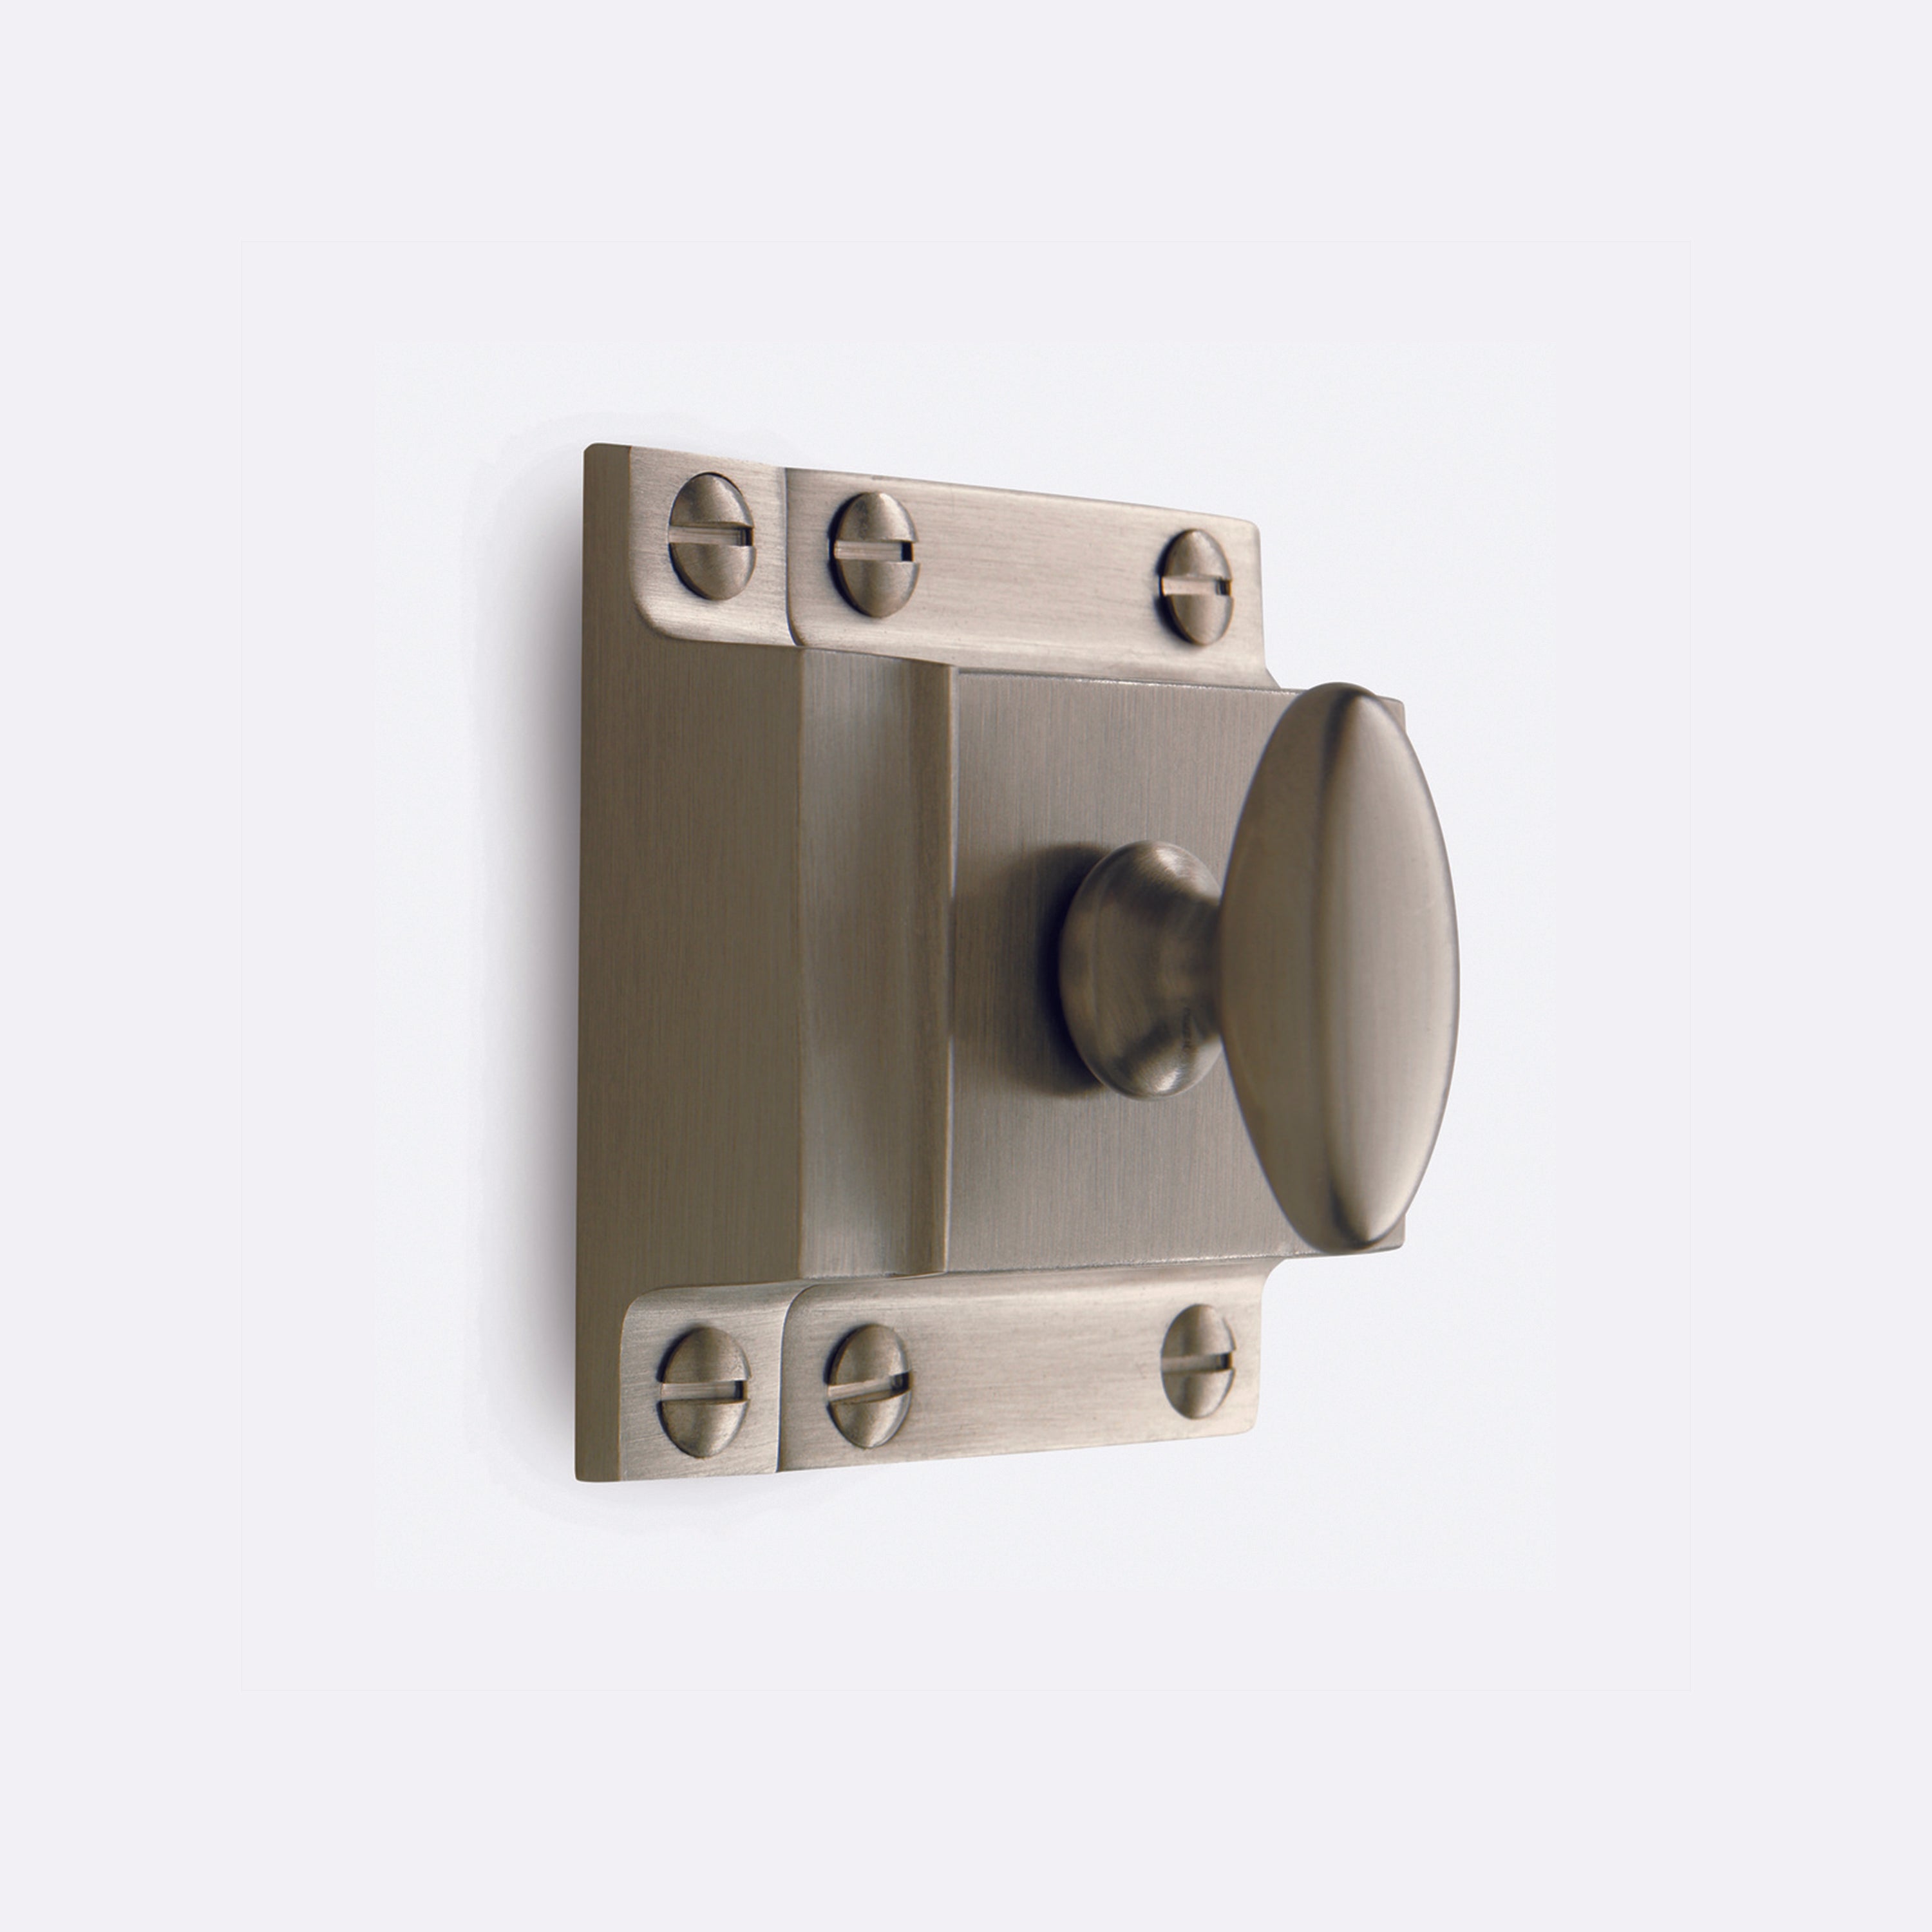 Large Oval Cupboard Latch by Rejuvenation Brushed Nickel